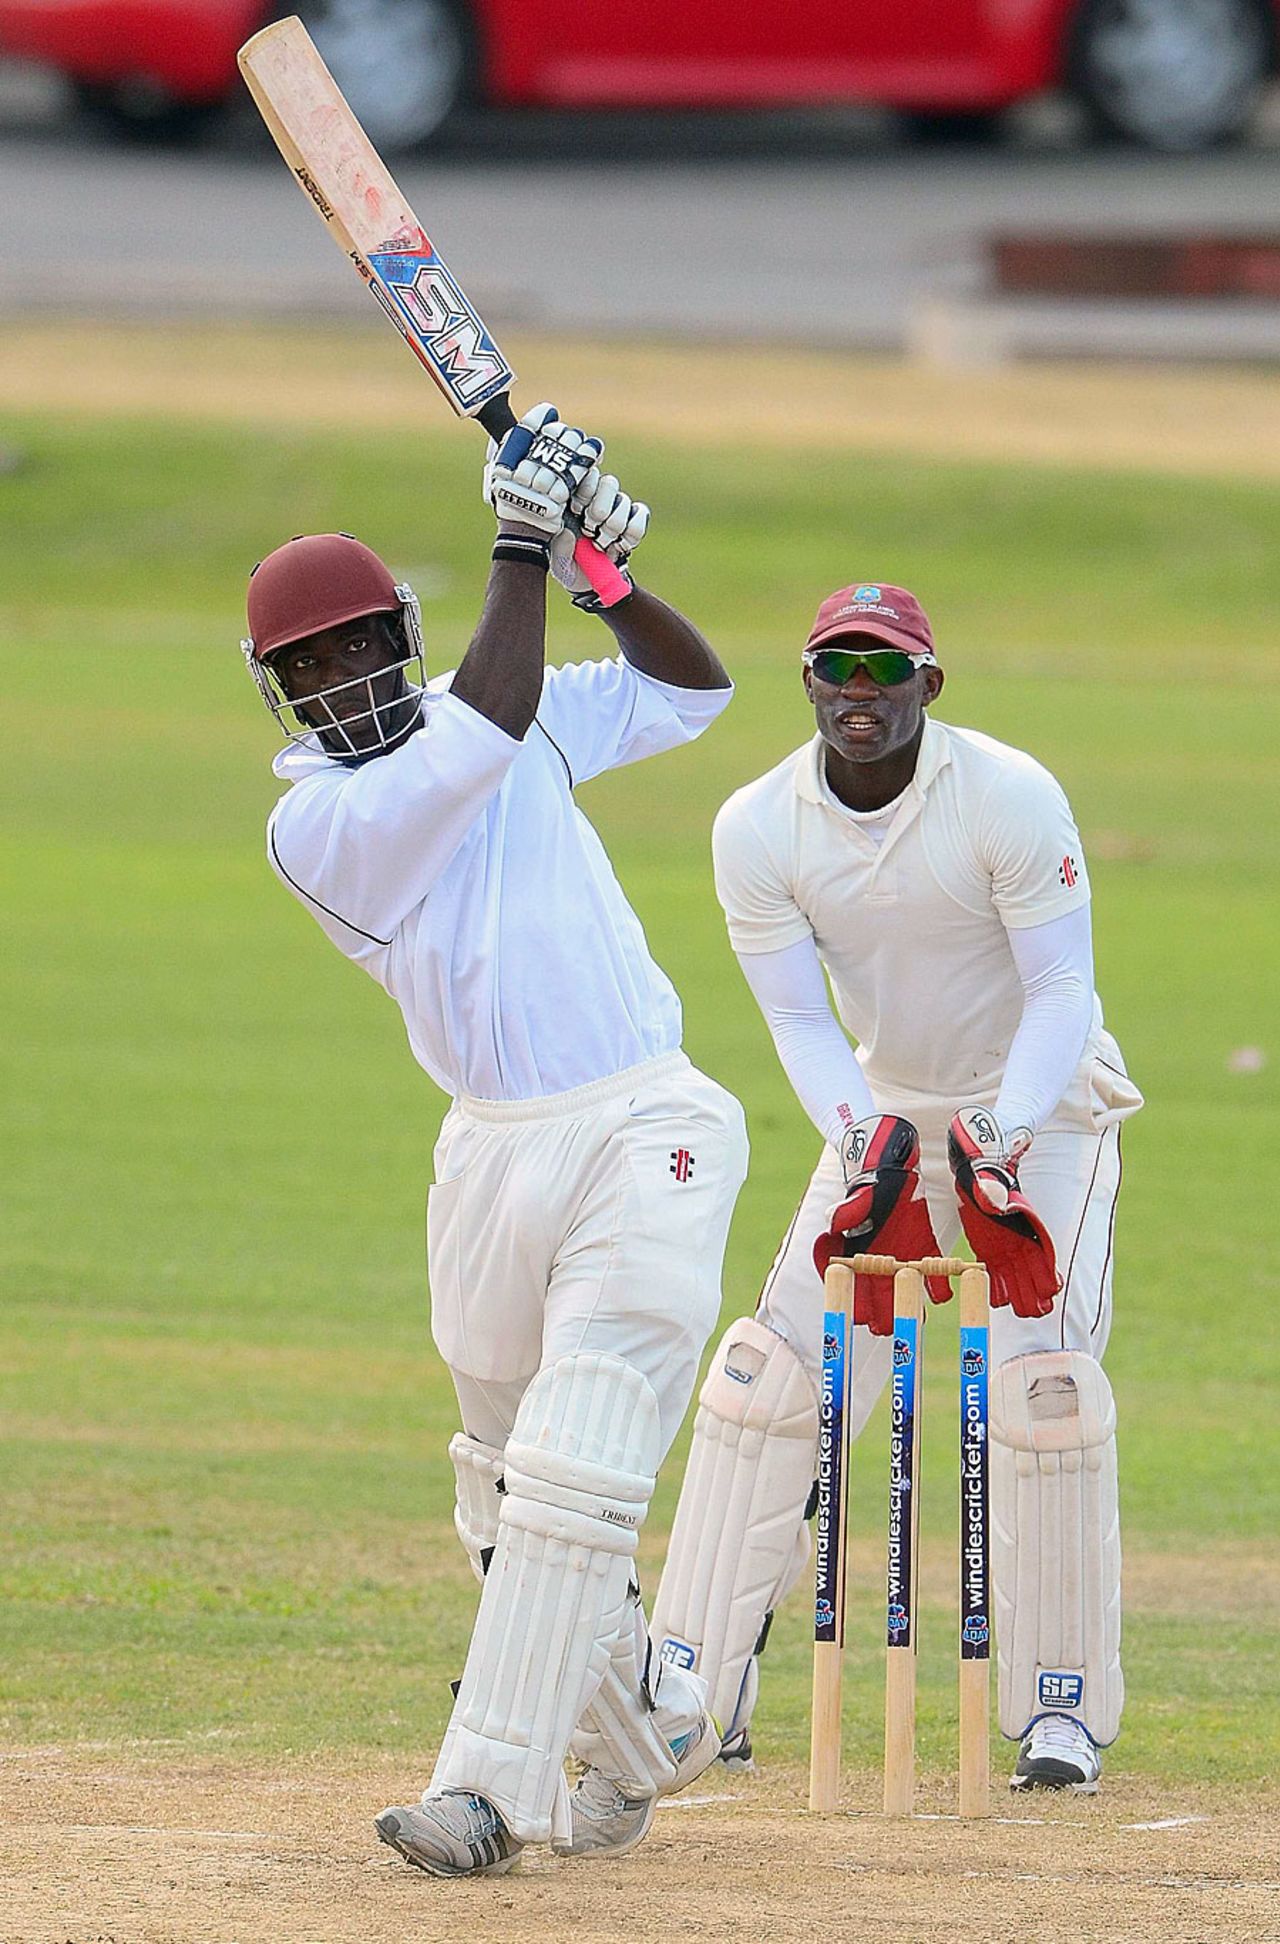 Chadwick Walton scored an unbeaten century for Combined Campuses and Colleges in the second innings, Combined Campuses and Colleges v Leeward Islands, Regional Four Day Competition, Day 4, Bridgetown, March 9, 2013